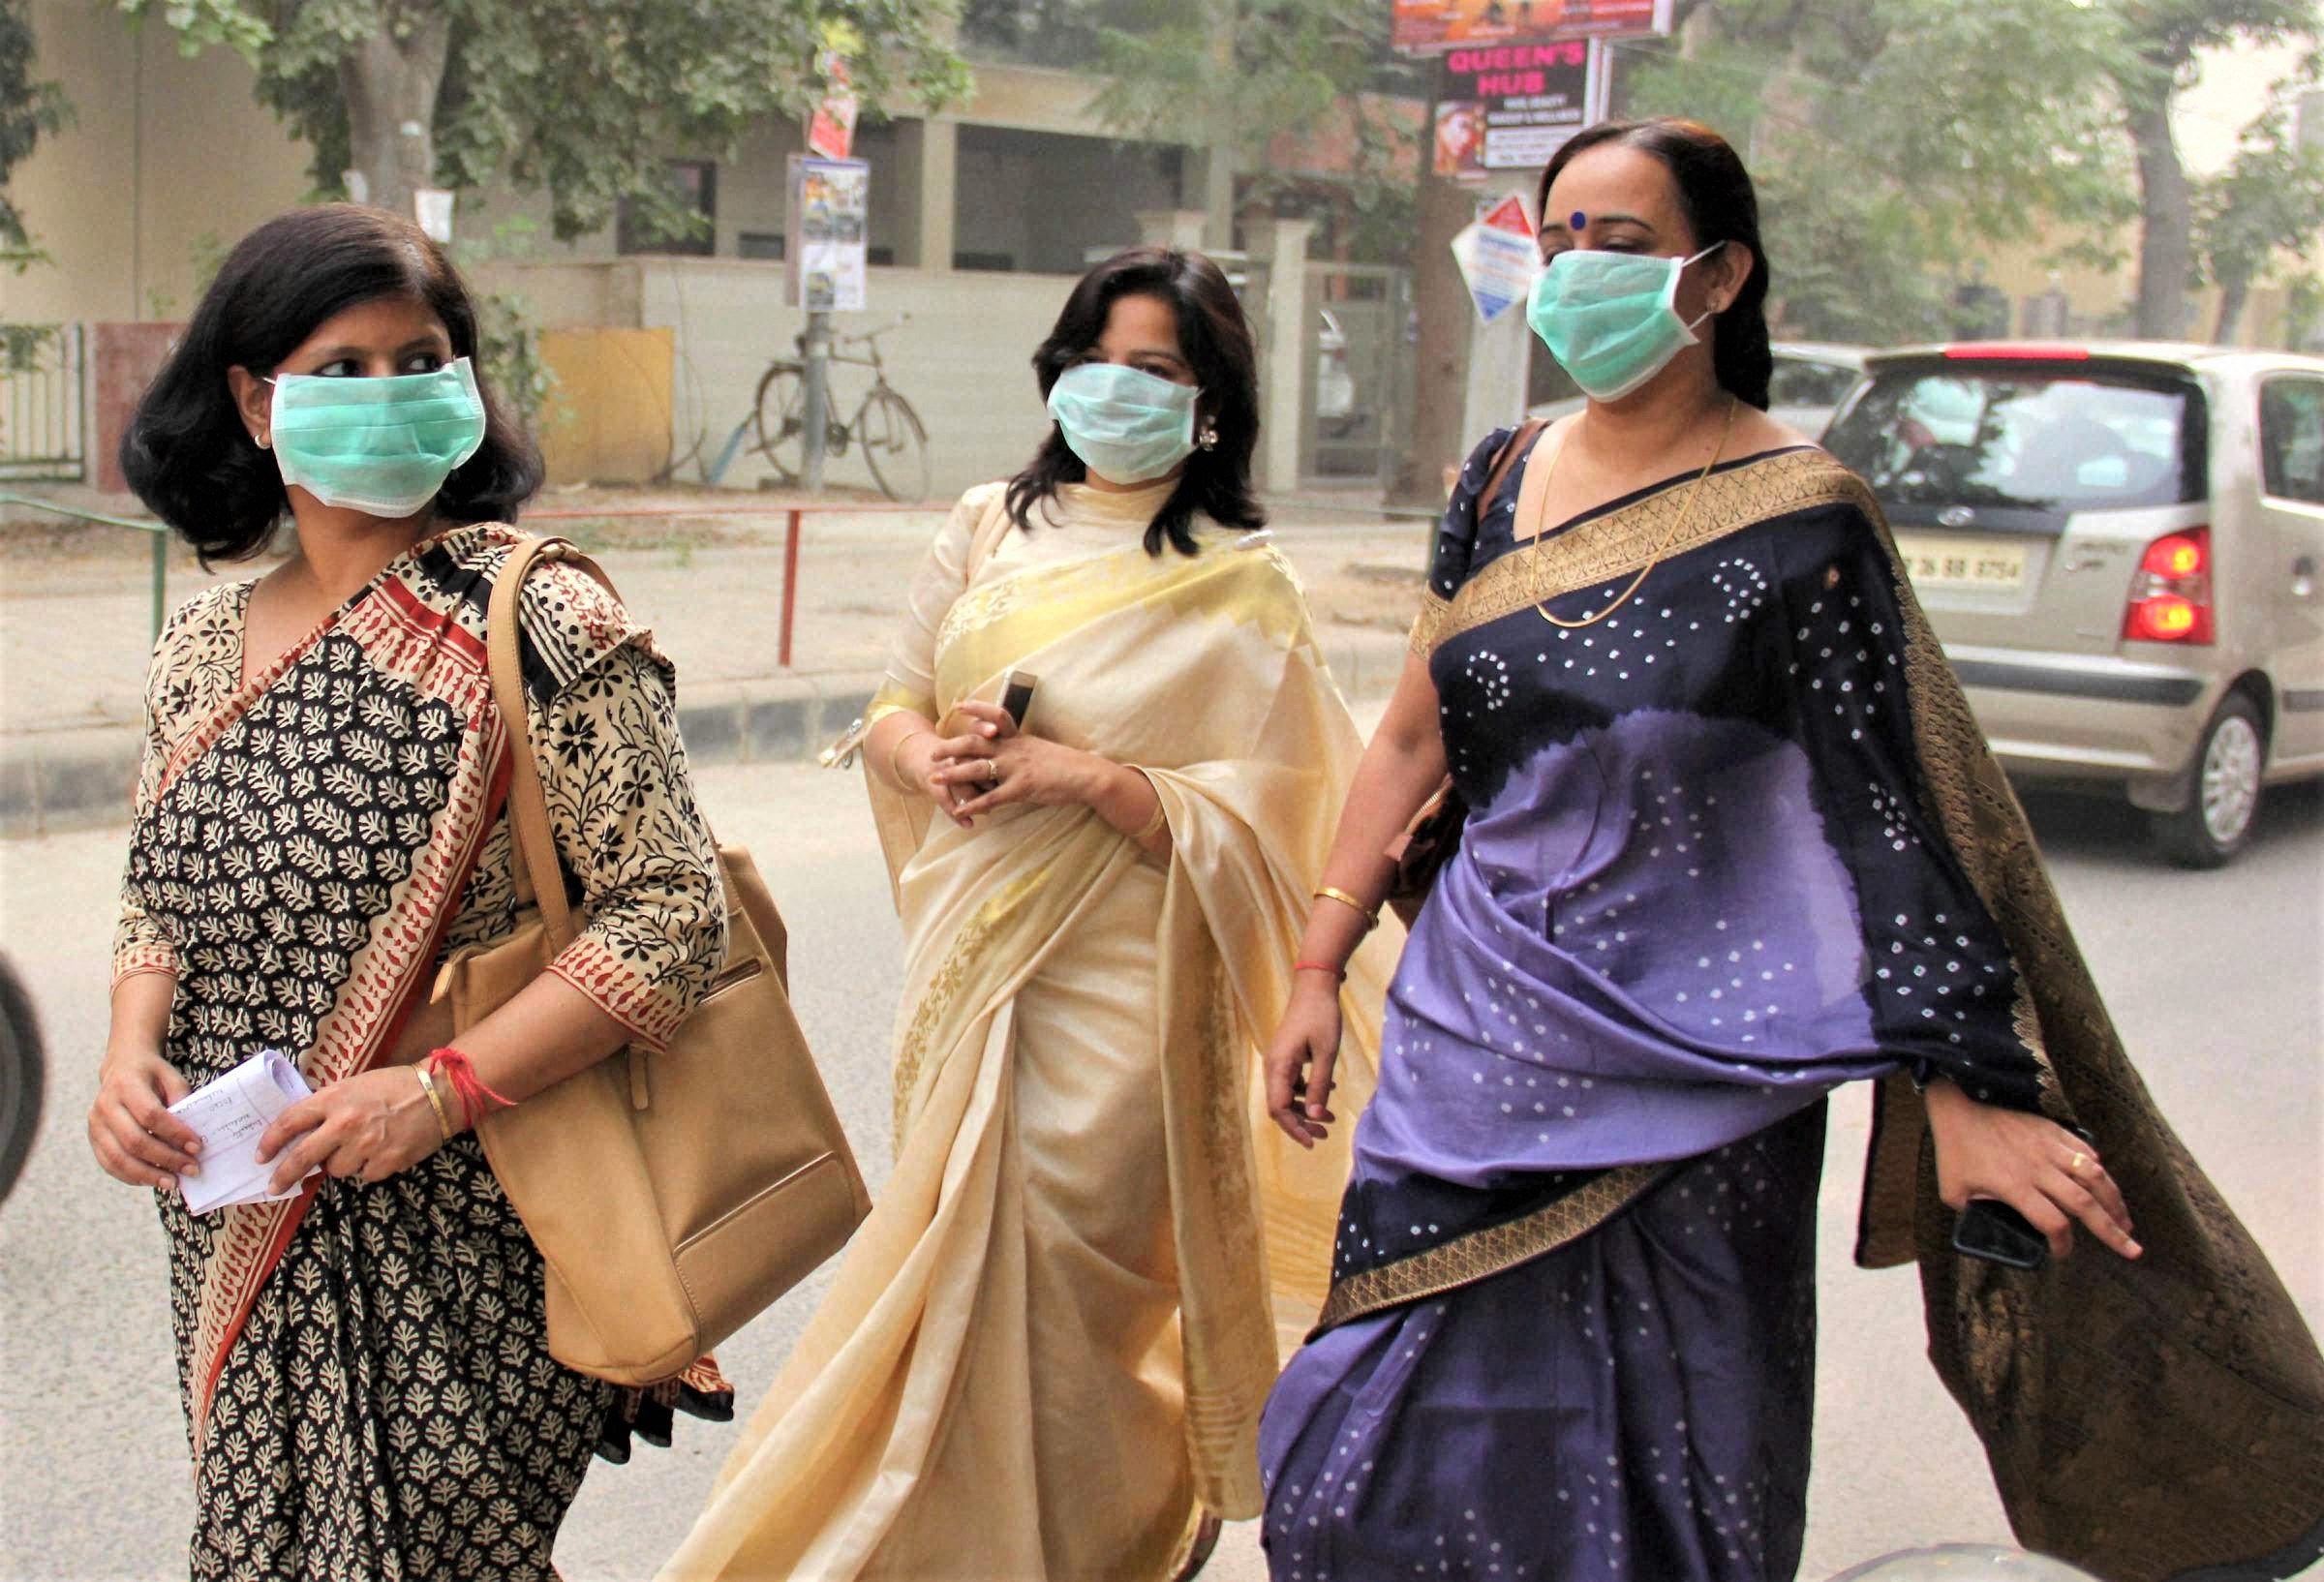 This Indian City Is Taking Huge Steps to Protect Its Residents From Dangerous Air Pollution Levels